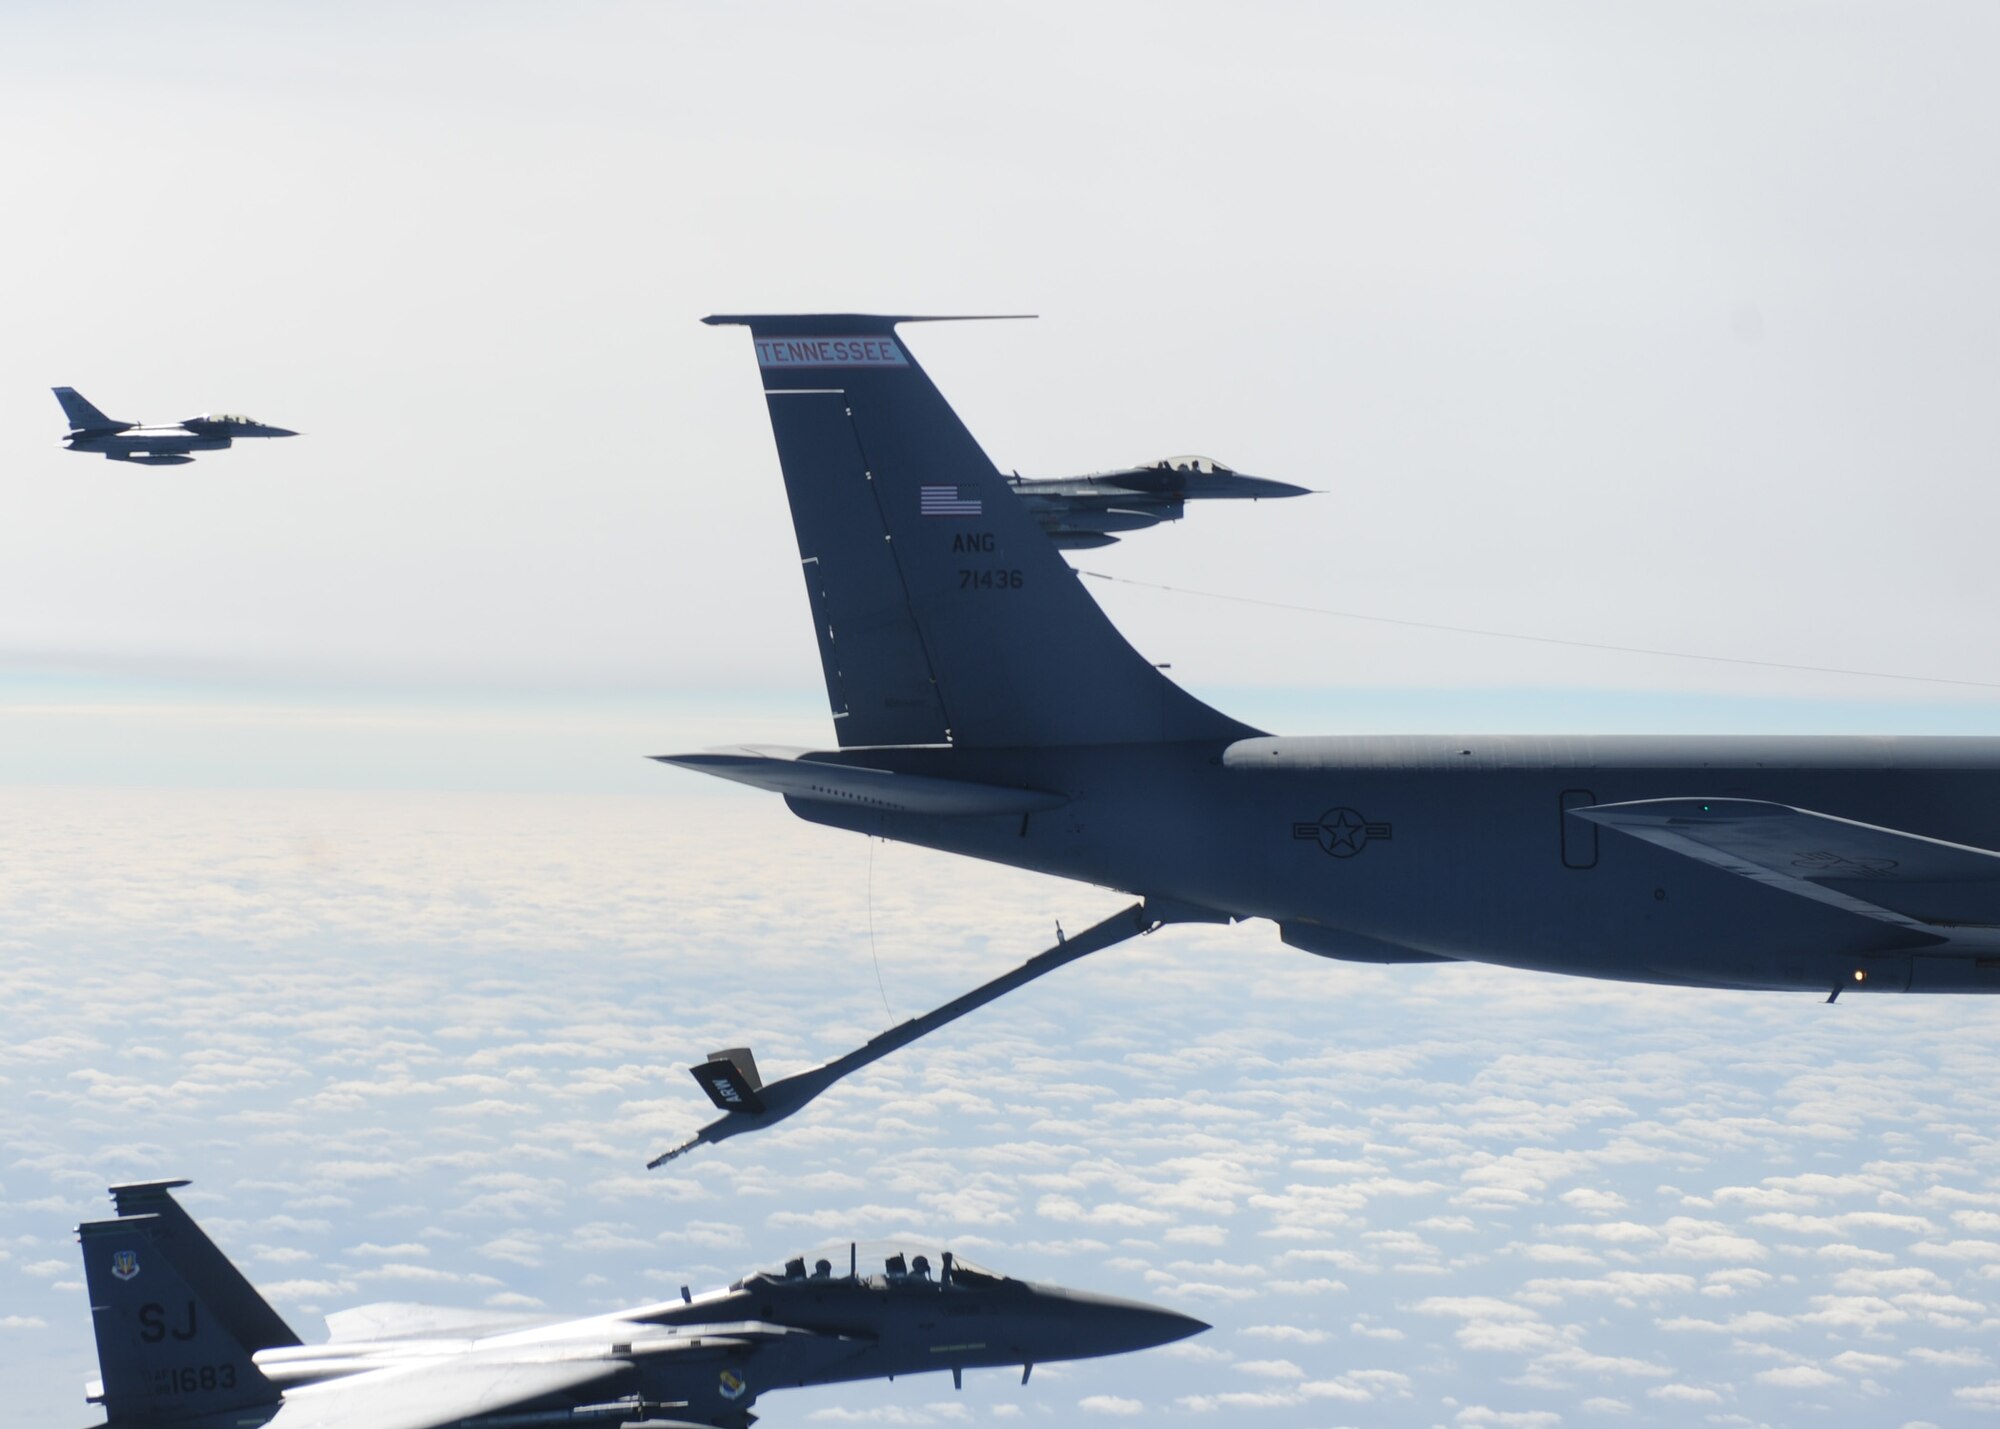 A 4th Fighter Wing F-15E Strike Eagle connects with a KC-135 Stratotanker from the 134th Air Reserve Wing for a refuel while 46th Test Wing F-16s stand by during a Combat Hammer mission Feb. 3.  Combat Hammer is an Air-to-Ground Weapons System Evaluation Program controlled by the 86th Fighter Weapons Squadron.  The F-15s from Seymour Johnson AFB, N.C., participated in the week-long evaluation dropping GPS and laser-guided weapons.  The WSEP was the first evaluation of Small Diameter Bombs at Eglin and first evaluation of Laser Joint Direct Attack Munitions in a Combat Hammer.   The WSEP program, run by the 53d Weapons Evaluation Group, is used to evaluate the effectiveness and suitability of combat air force weapon systems. The evaluations are accomplished during tactical deliveries of fighter, bomber and unmanned aerial system precision guided munitions, on realistic targets with air-to-air and surface-to-air defenses. For many of the aircrew participating in WSEP, it is the first time employing live weapons. This provides a level of combat experience many units face during combat.  (U.S. Air Force photo/Maj. Scott Alford.)